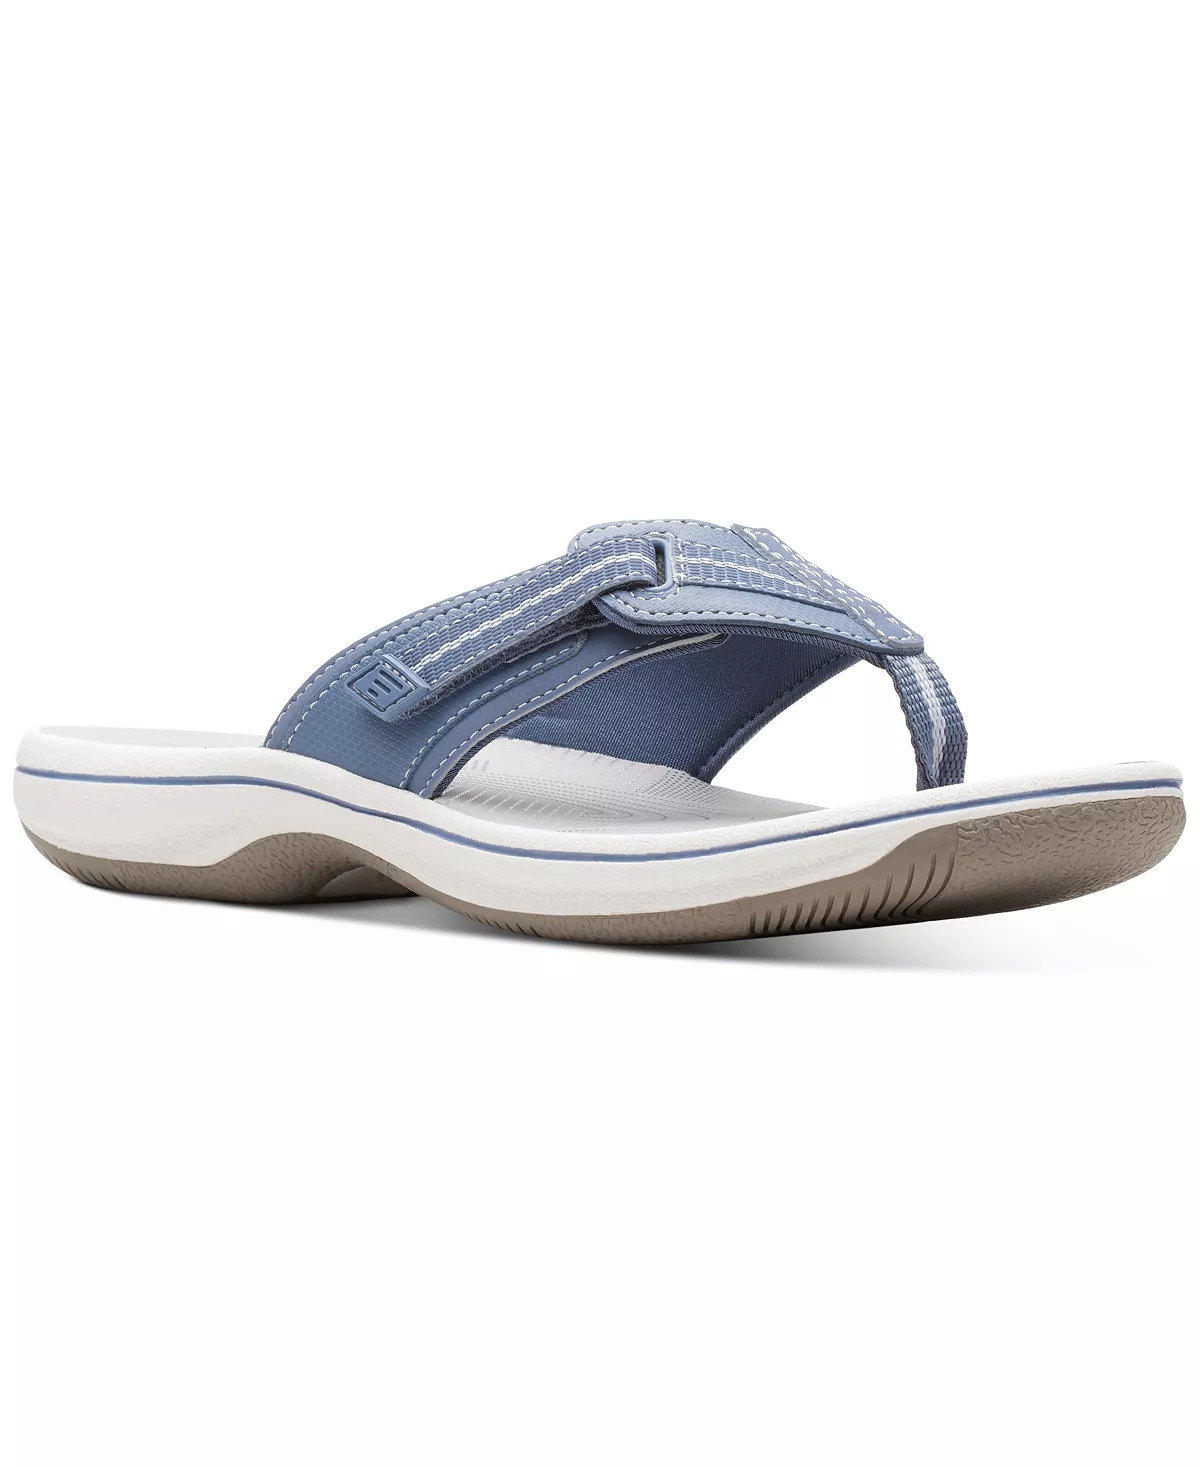 Clarks Women's Cloudsteppers Brinkley Jazz Sandals (Various colors) $27.50 + Free Shipping